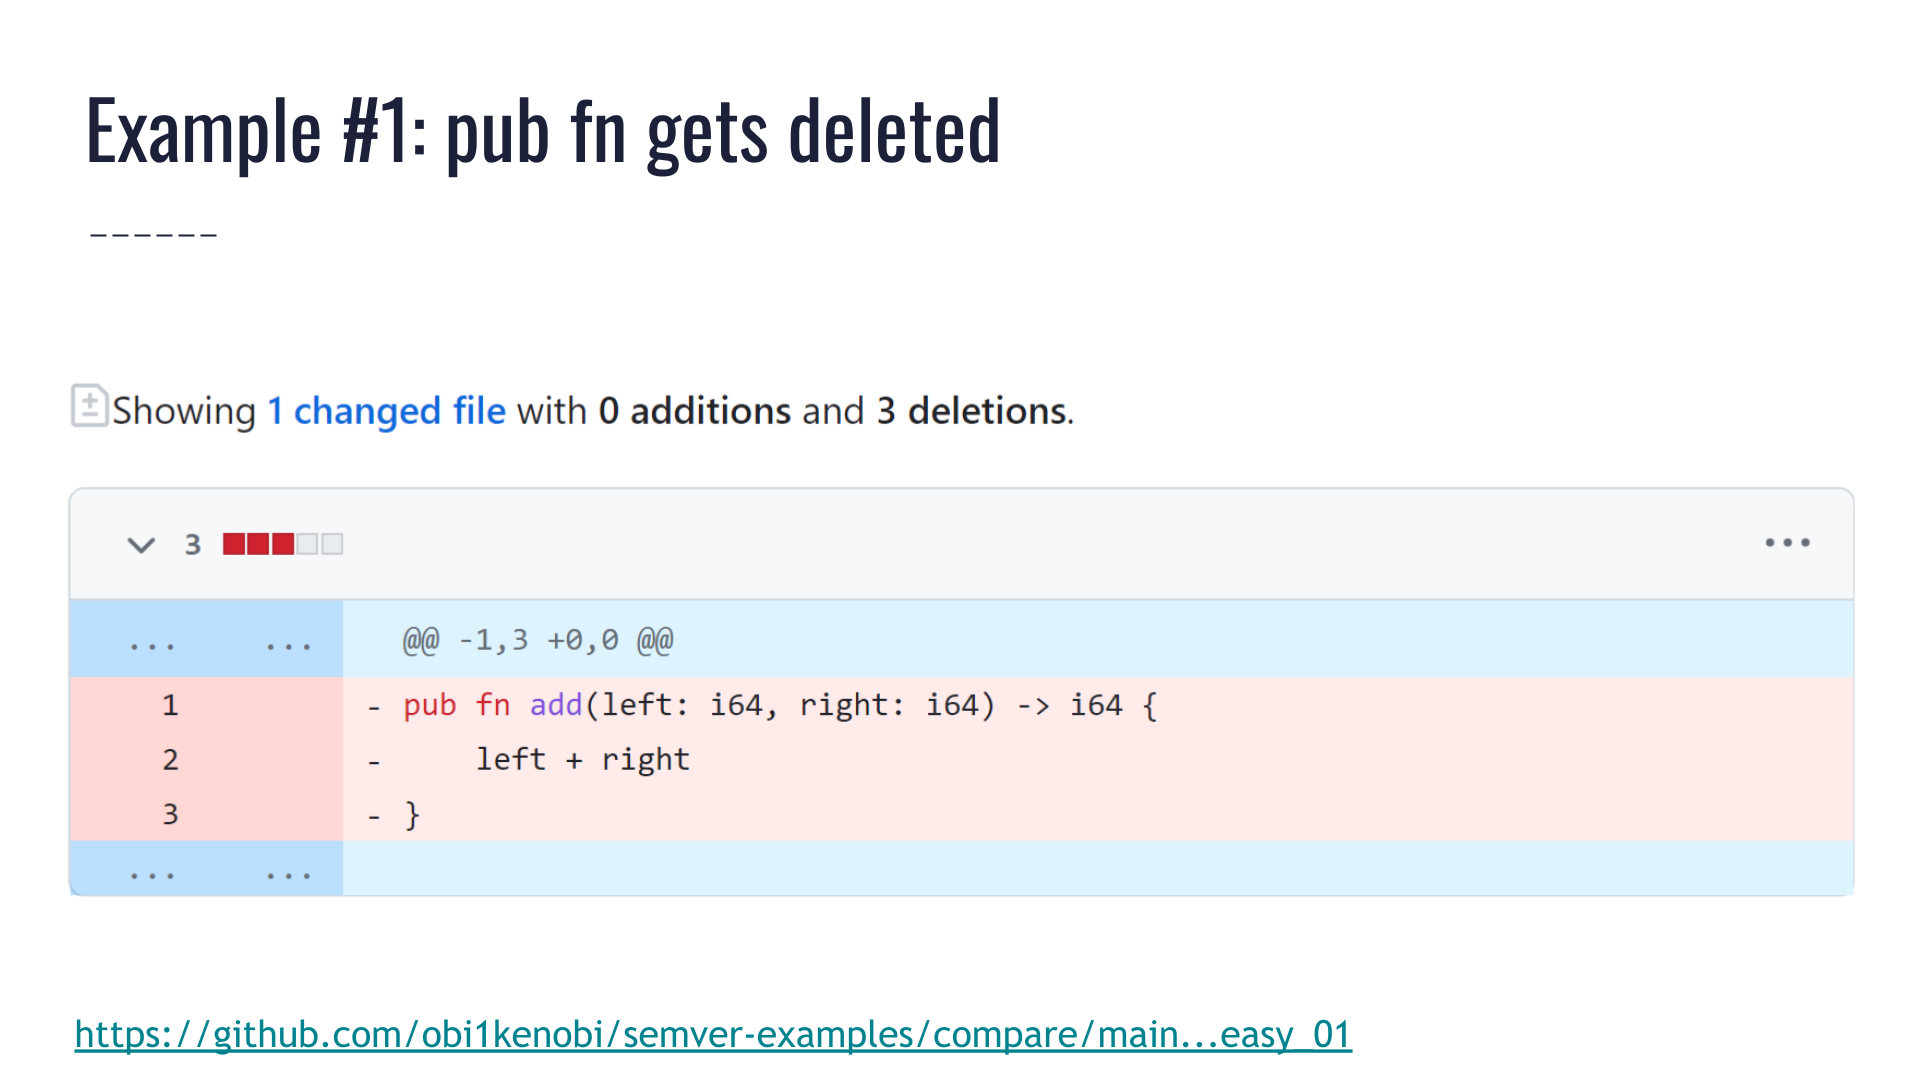 A GitHub pull request showing a public function called "add" being deleted from a Rust file.